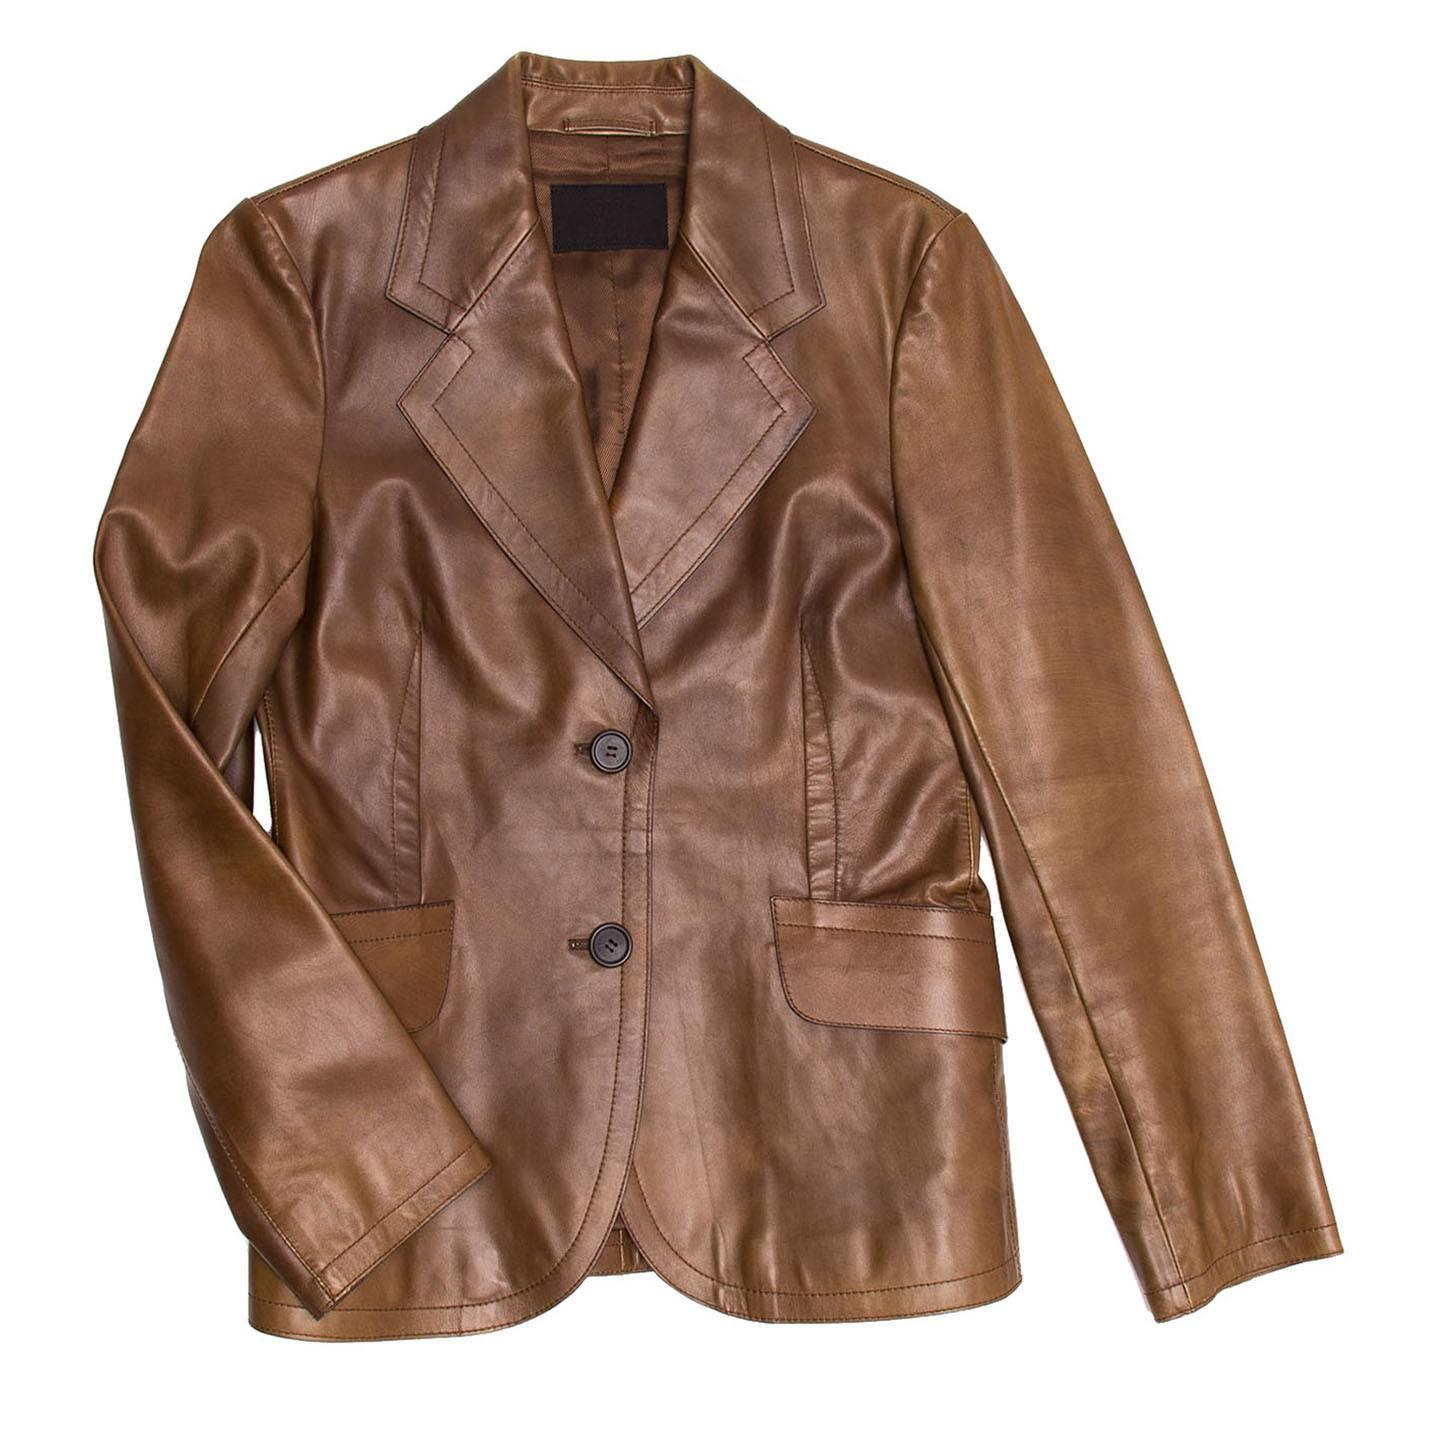 2 button toffee brown colored blazer in a subtle distressed leather. 2 pocket flaps at front side. Tonal topstitching detail along the pocket flaps and lapels.

Size  44 Italian sizing

Condition  Excellent: worn once